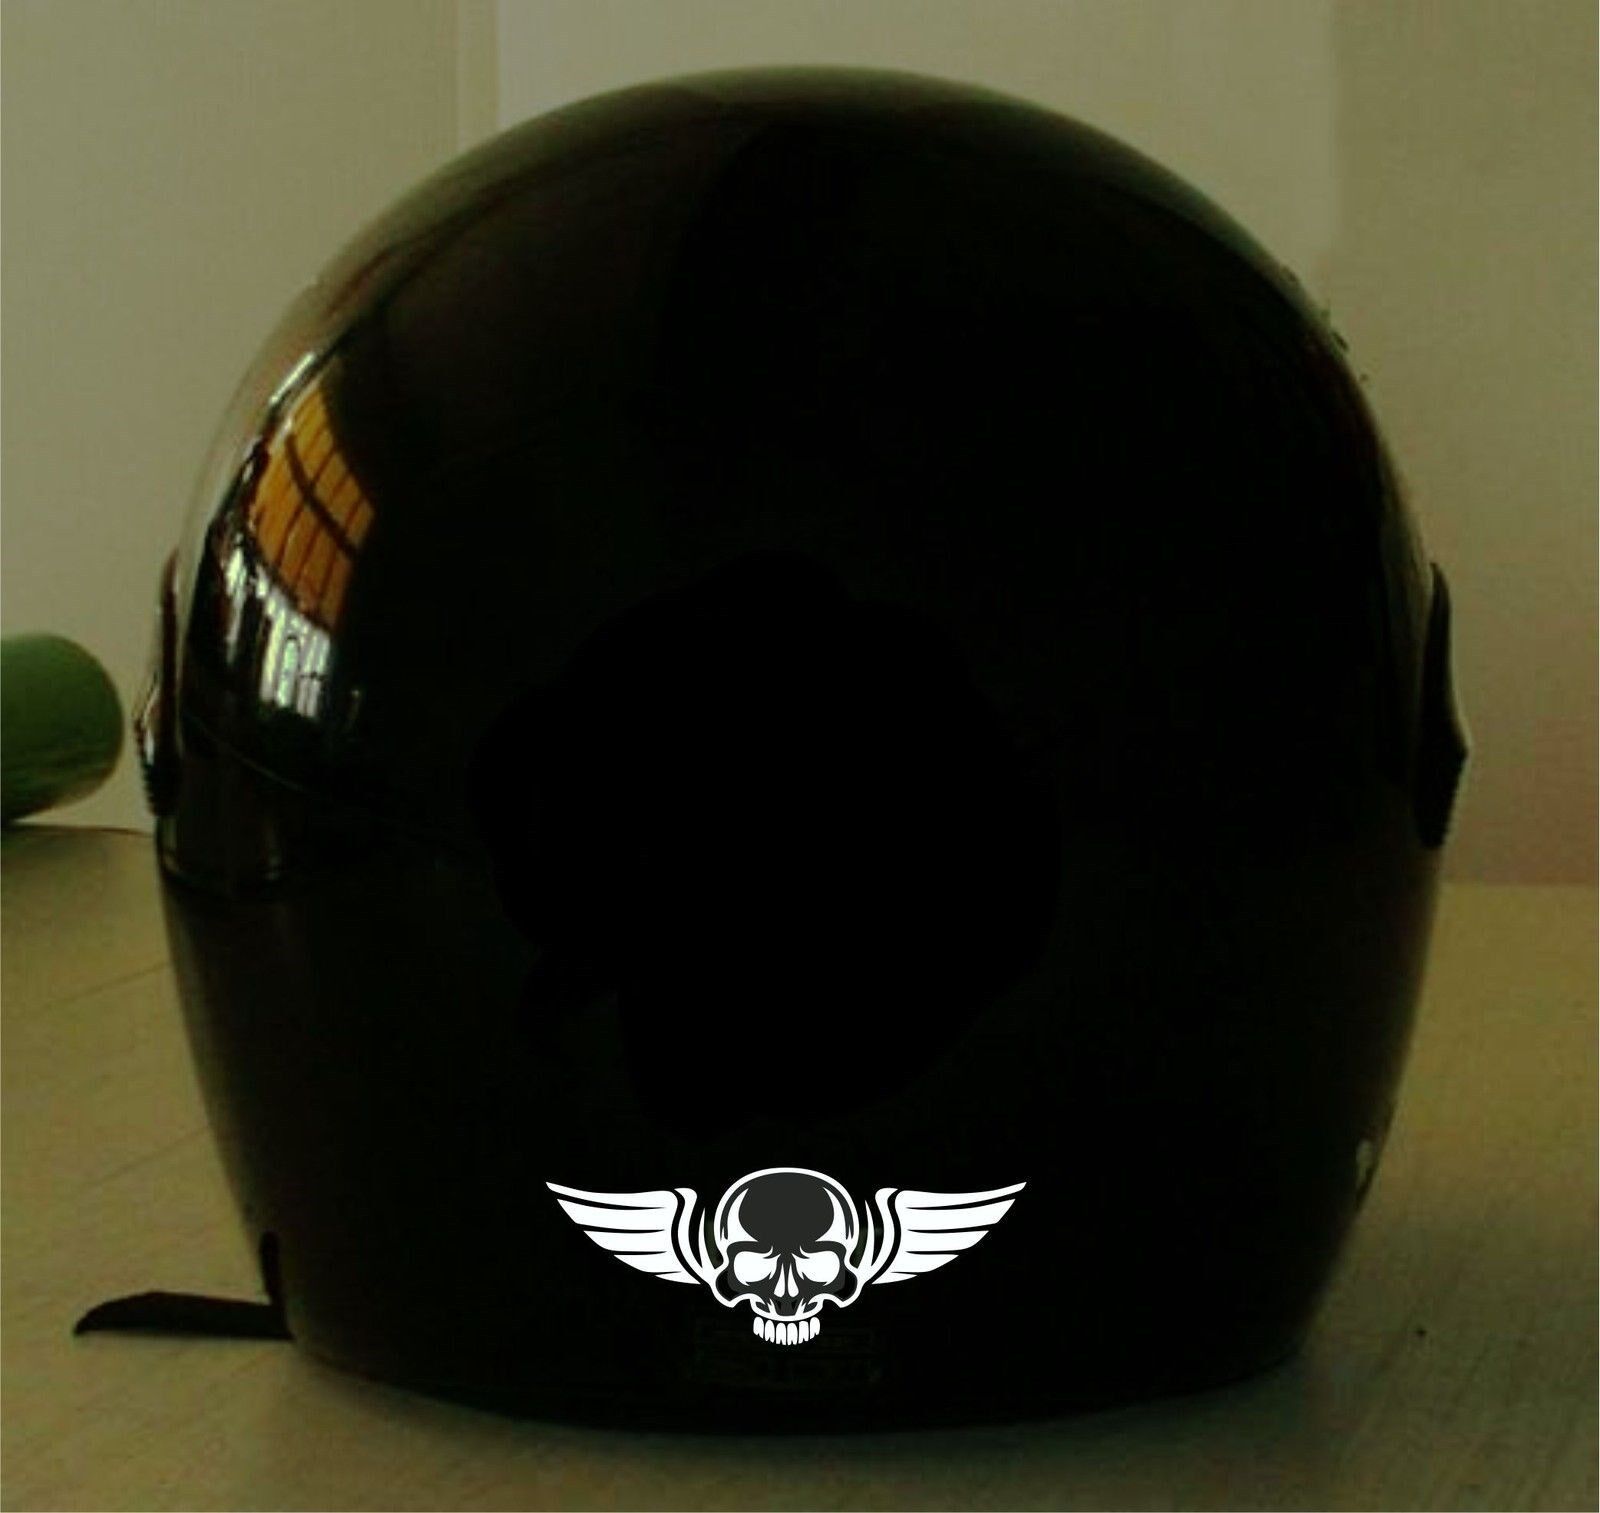 SKULL WITH WINGS REFLECTIVE VINYL HELMET DECAL...2 FOR 1 PRICE